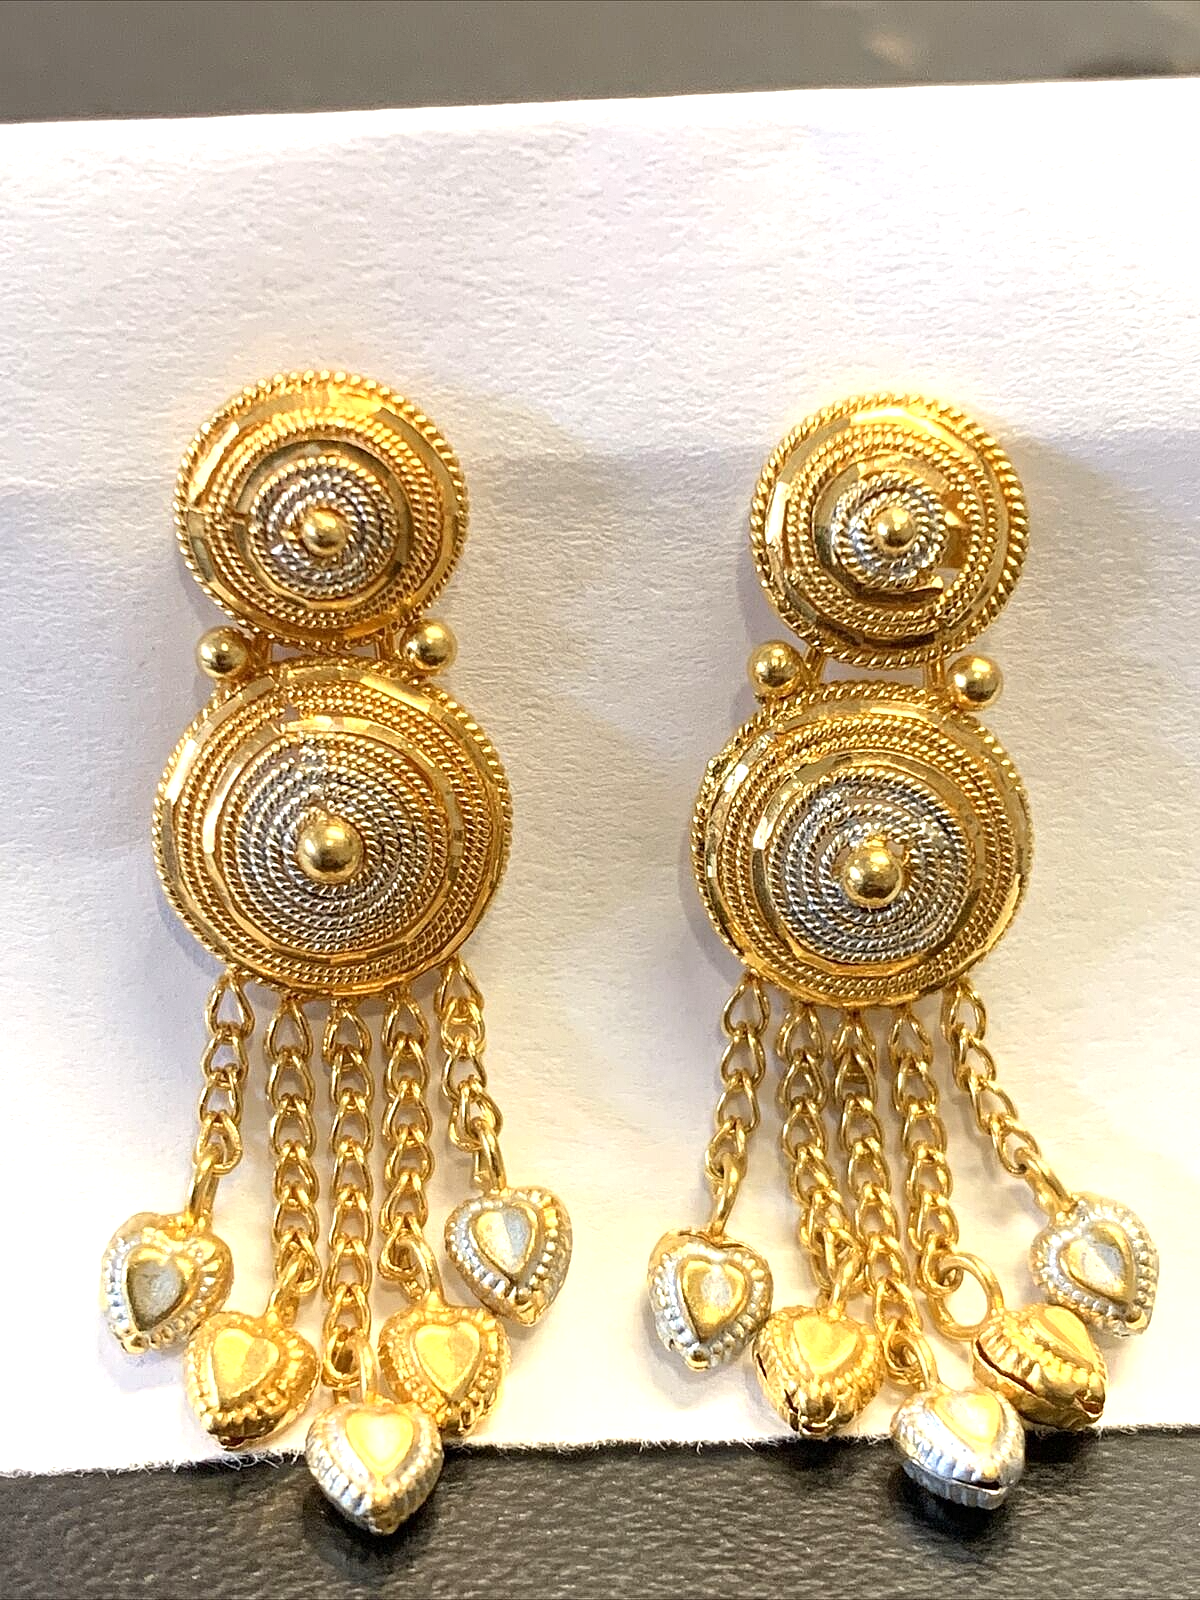 Buy quality 18k gold new classical earrings in Ahmedabad